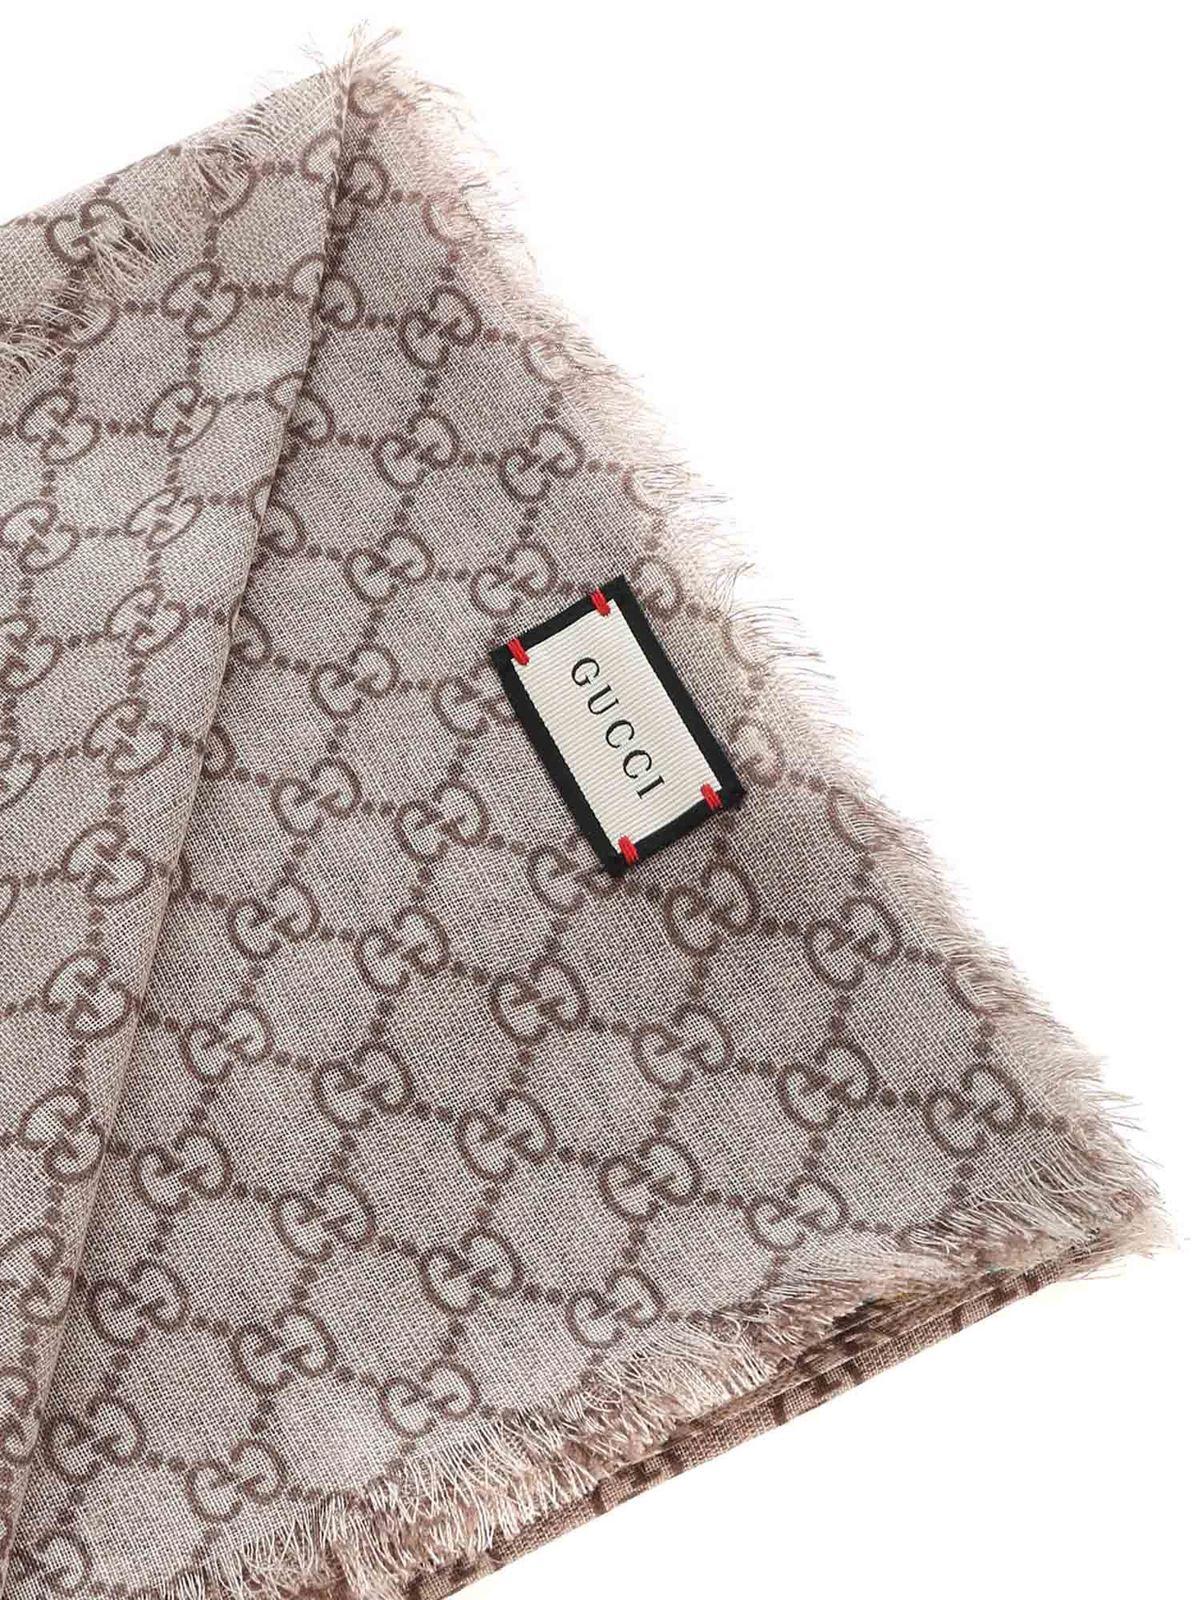 Gucci Wool Printed Beige Gg Scarf in Natural for Men - Lyst